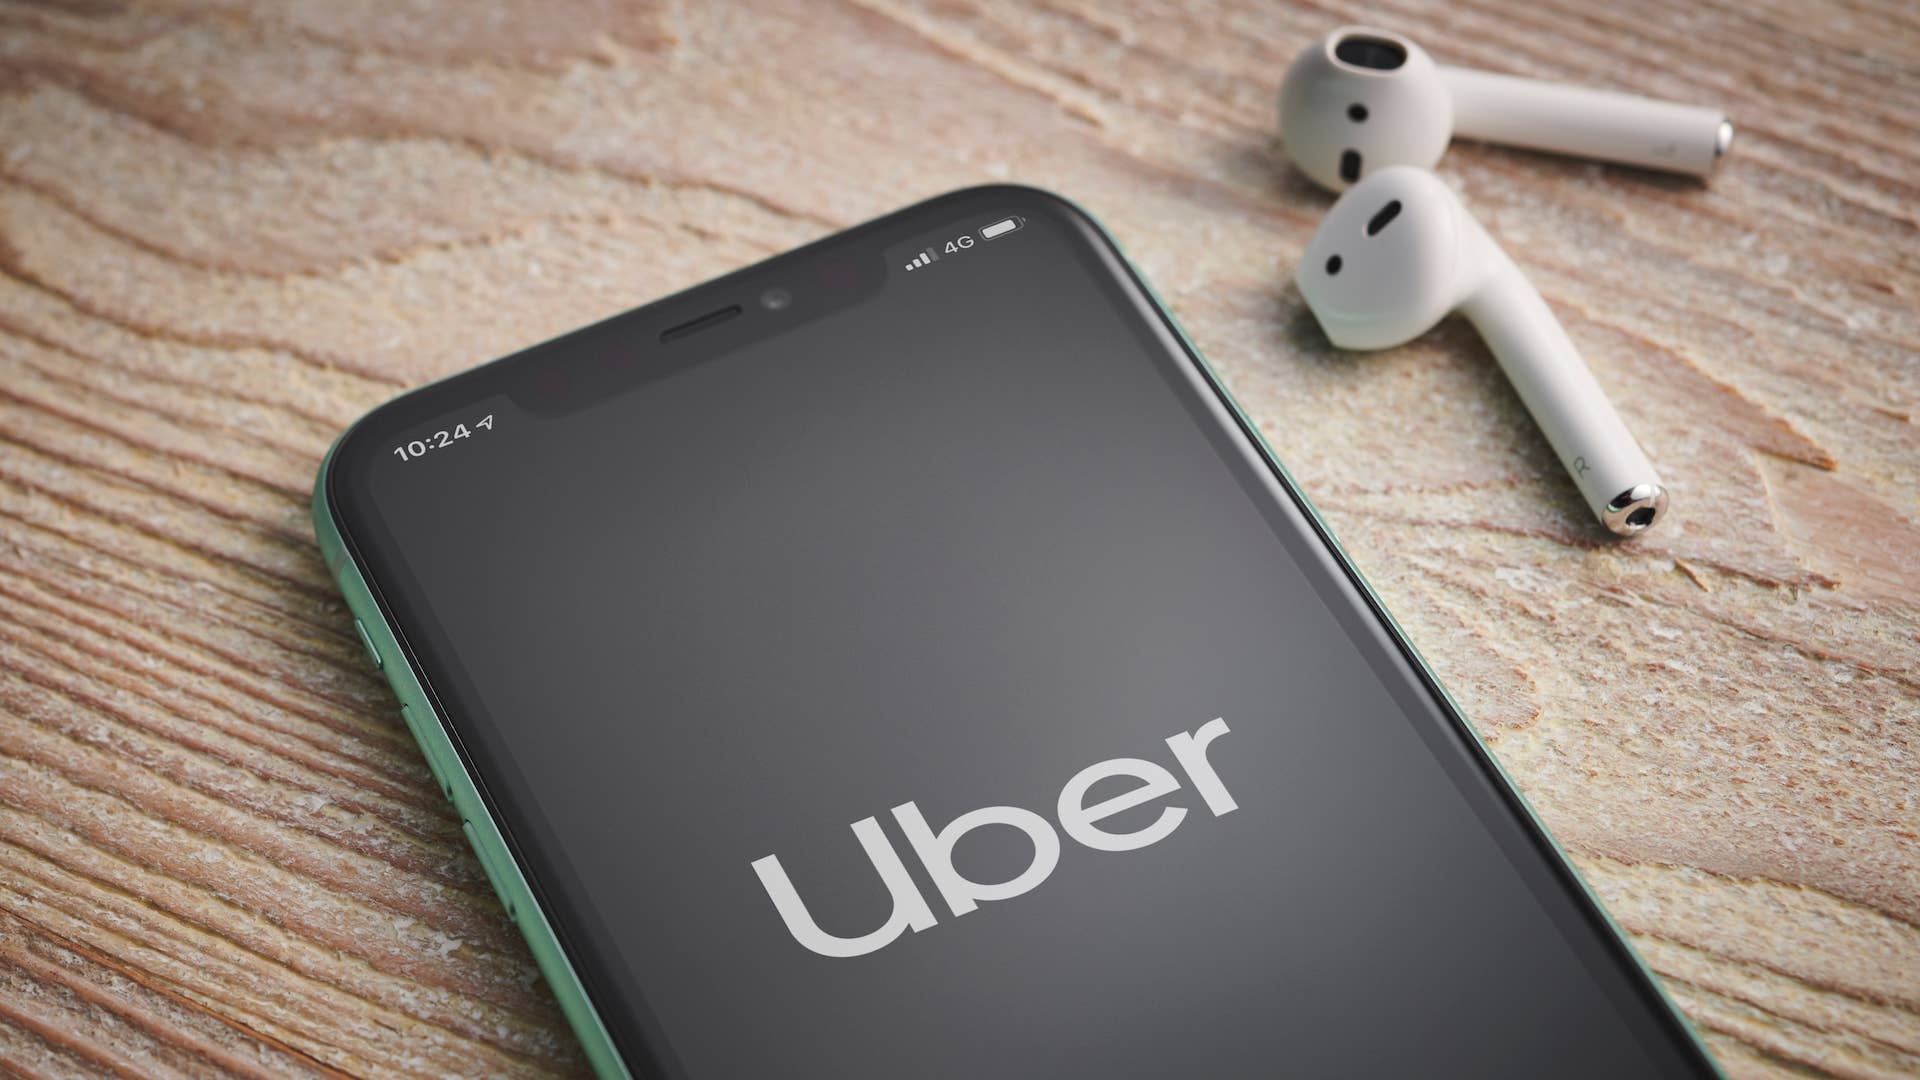 An Apple iPhone 11 smartphone with the Uber taxi app logo on screen.